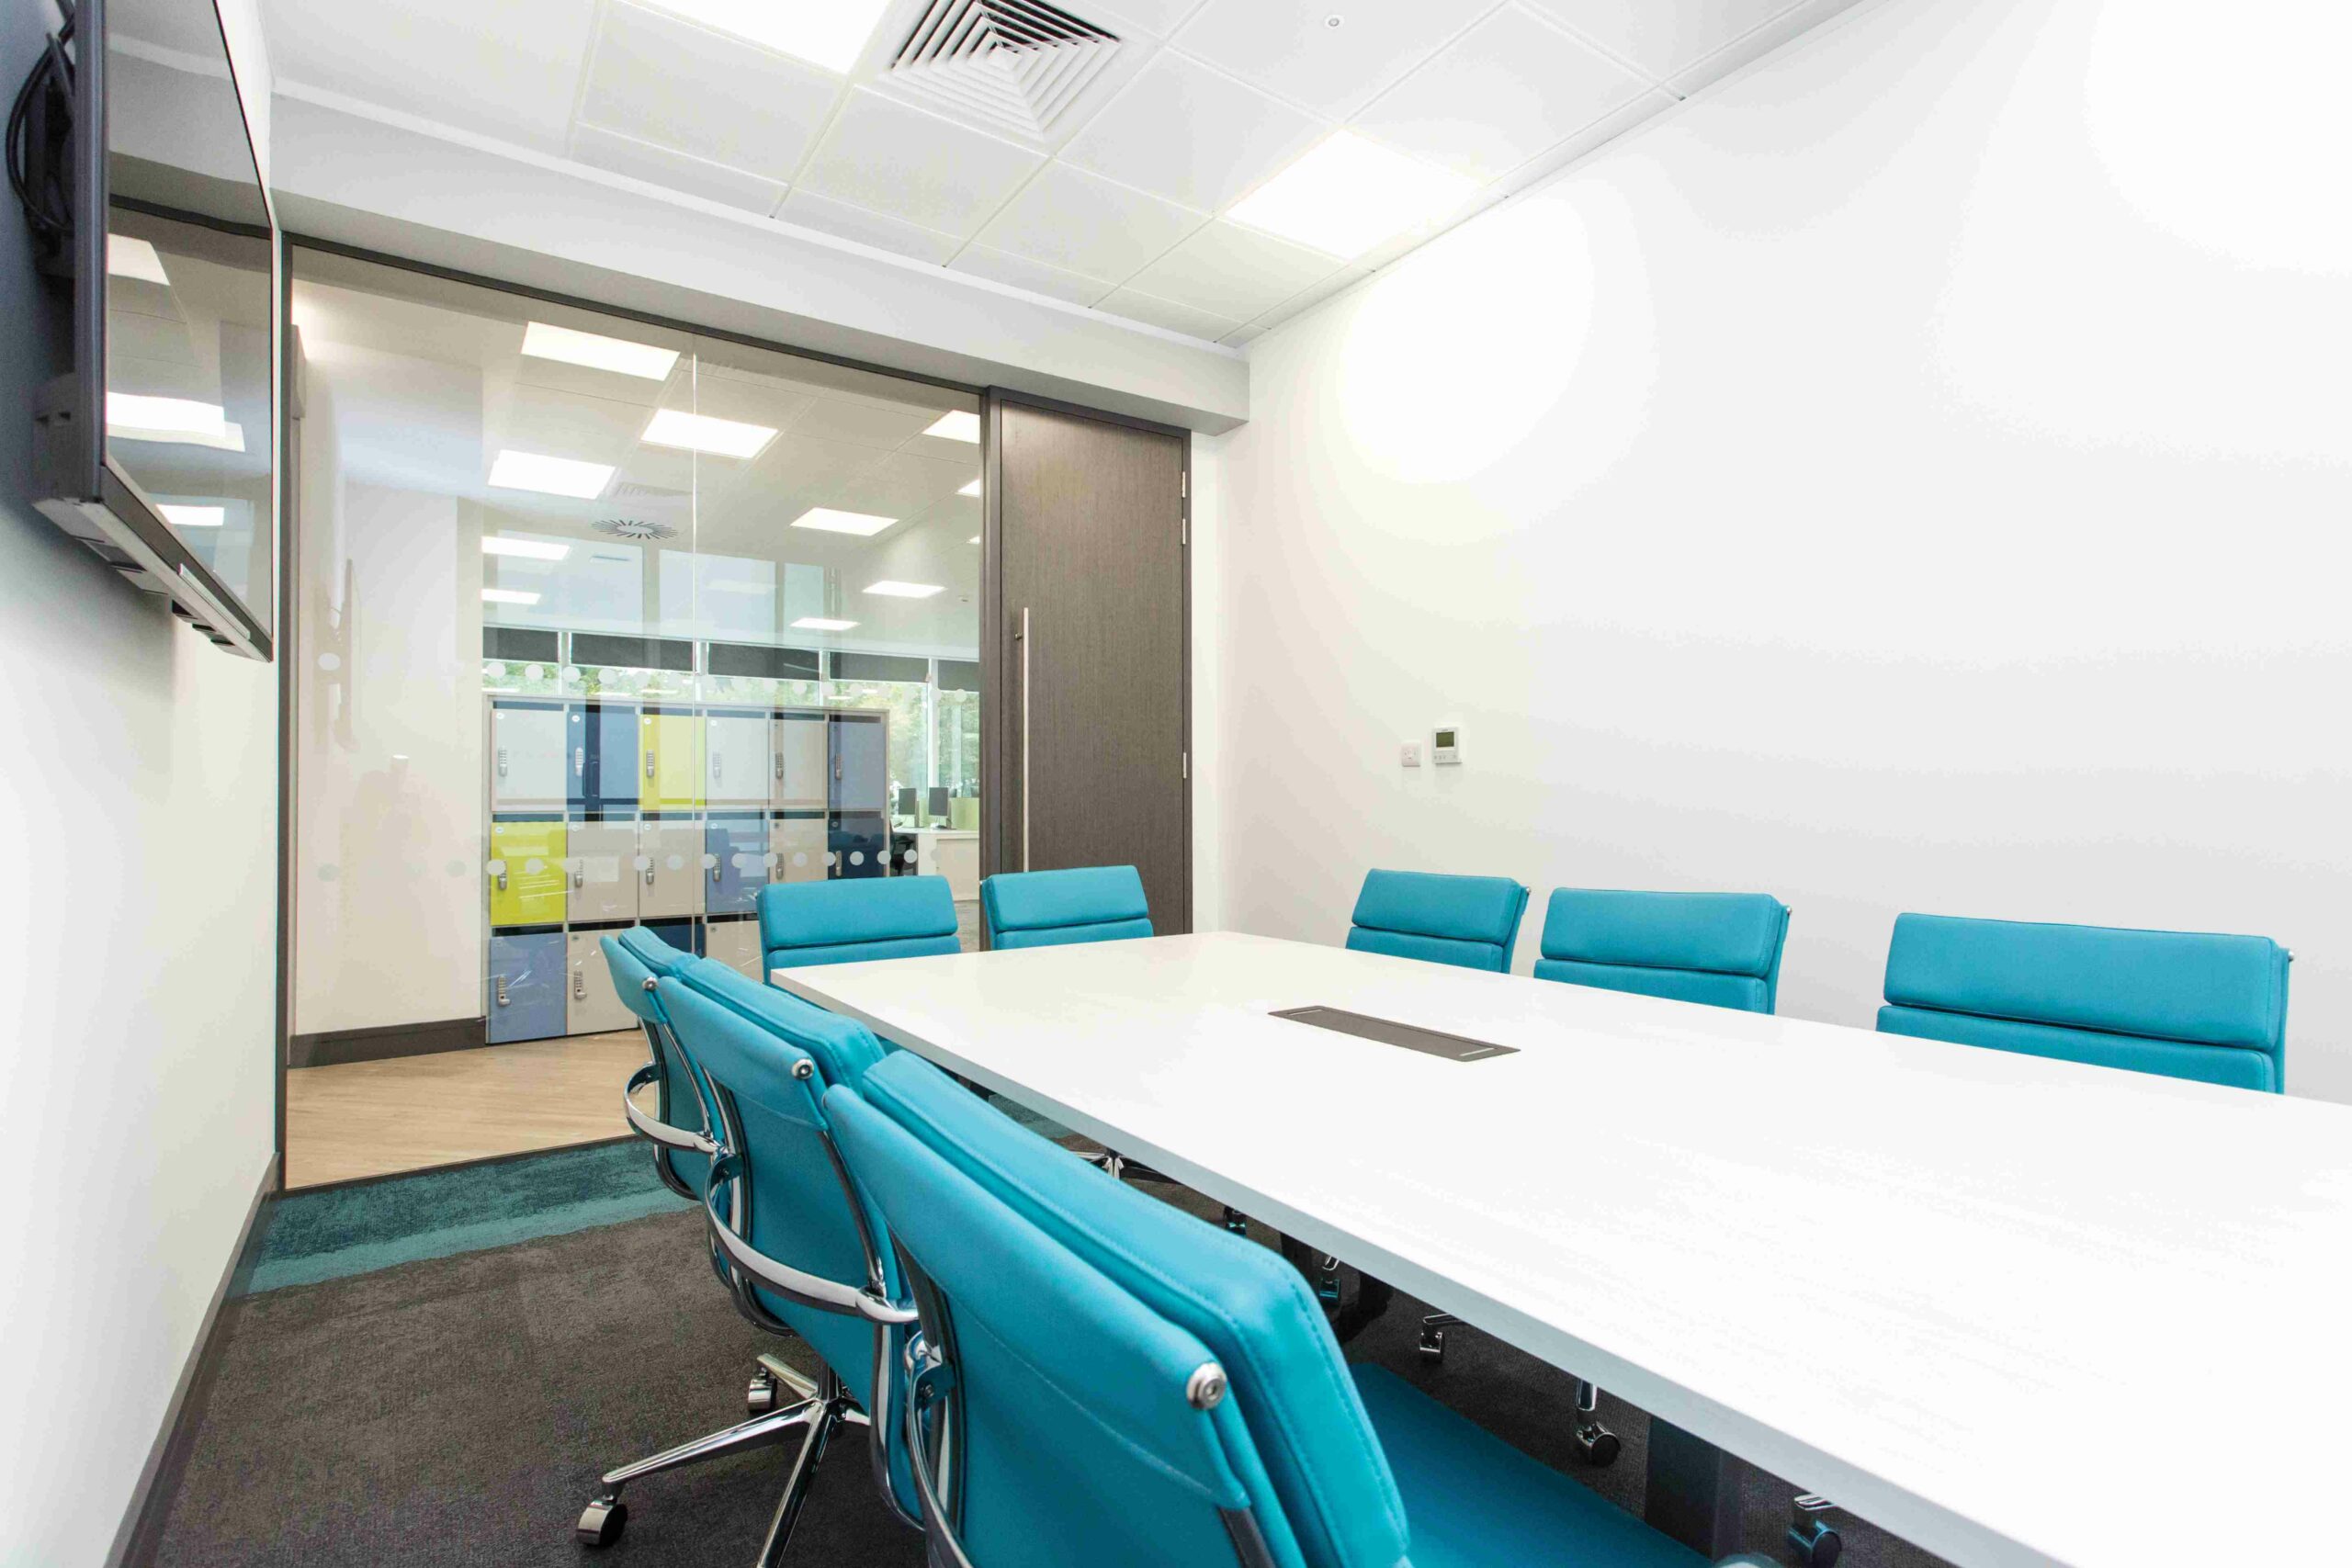 A meeting room with a long rectangular table, surrounded by teal-coloured chairs.